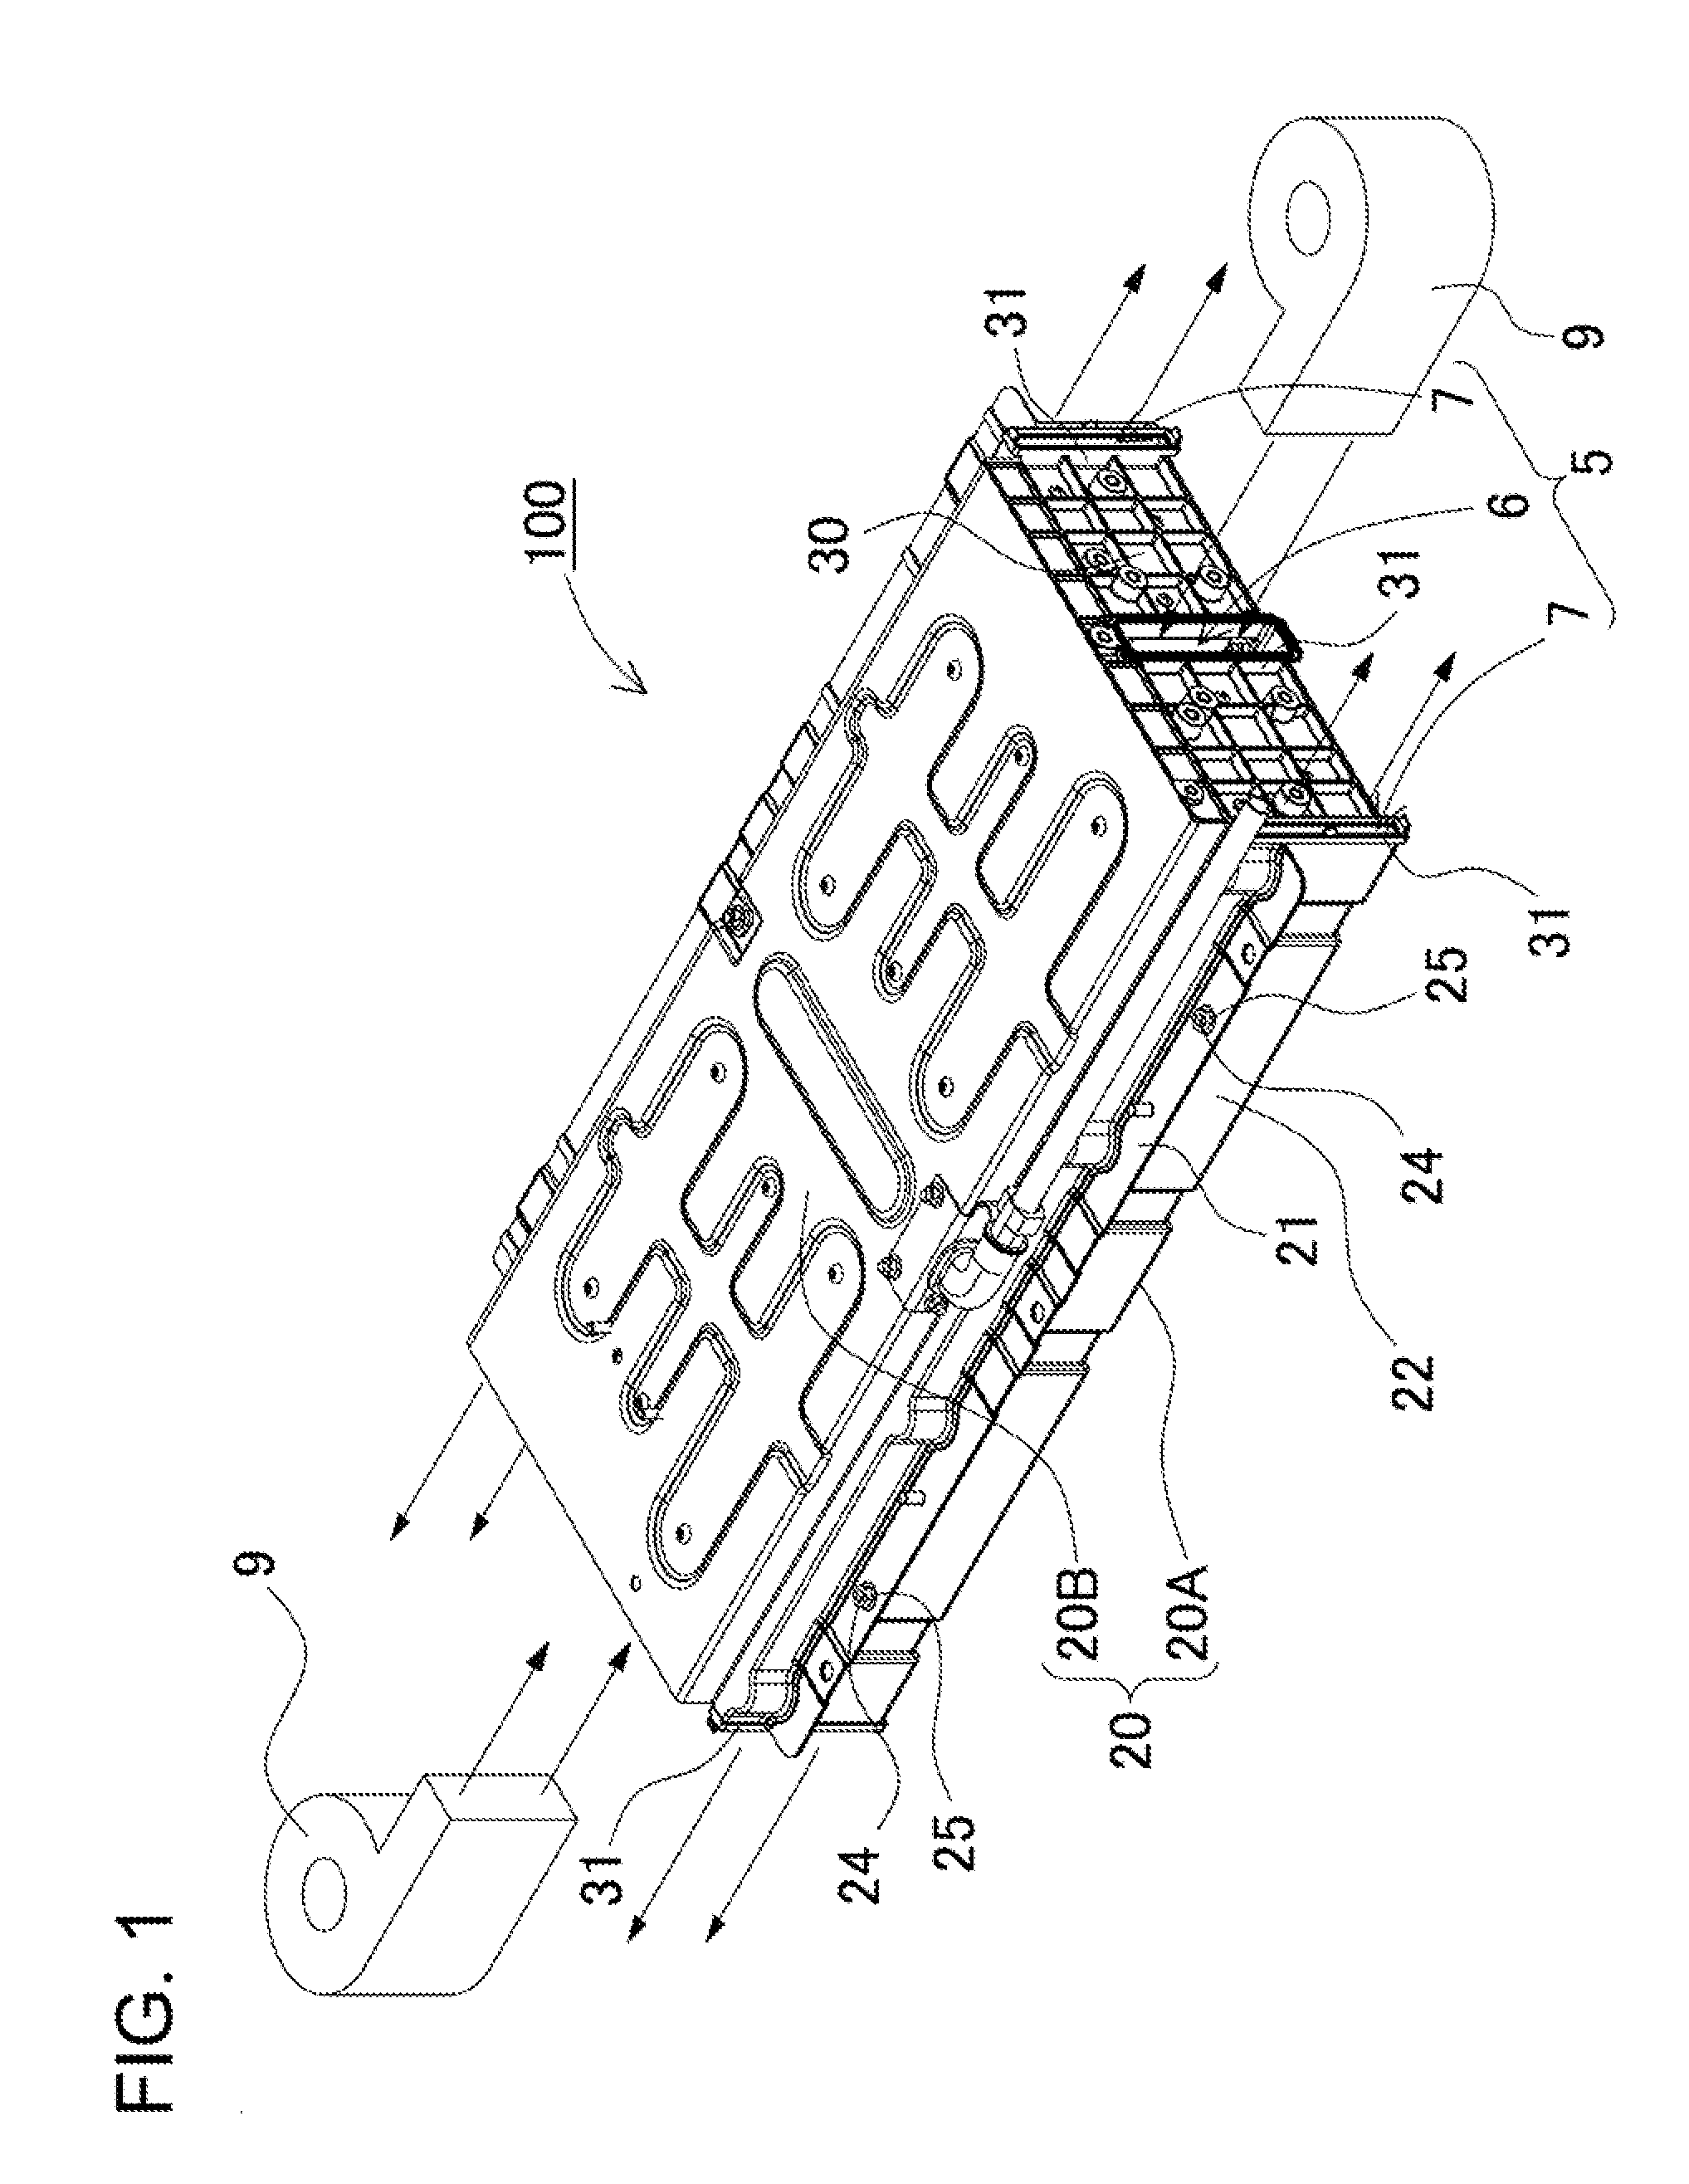 Power supply device including a plurality of battery cells arranged side by side